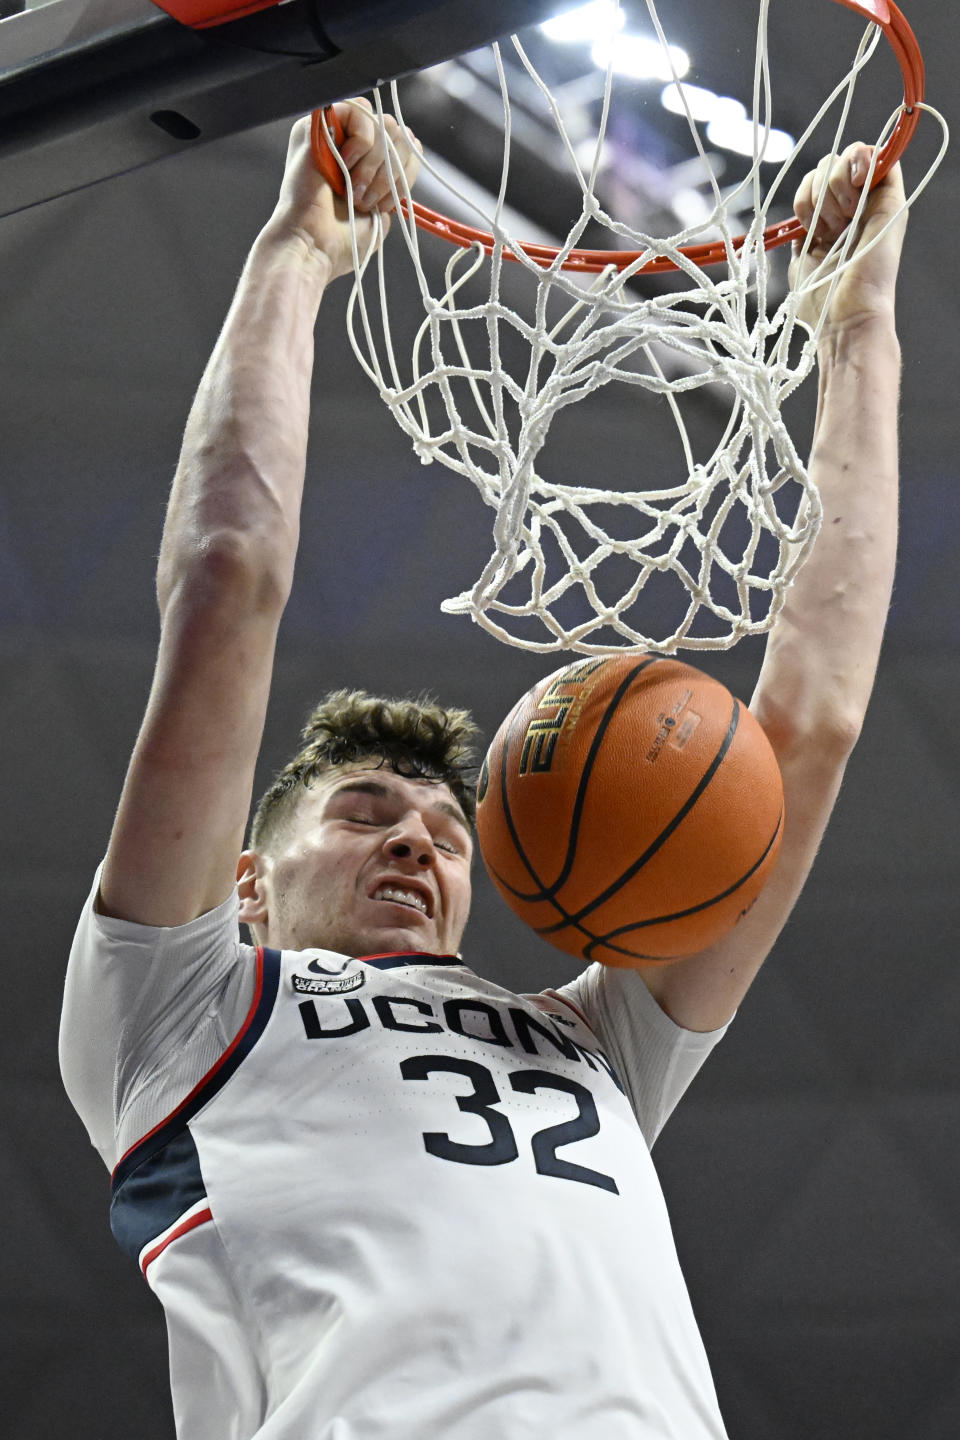 UConn center Donovan Clingan dunks in the second half of an NCAA college basketball game against New Hampshire, Monday, Nov. 27, 2023, in Storrs, Conn. (AP Photo/Jessica Hill)